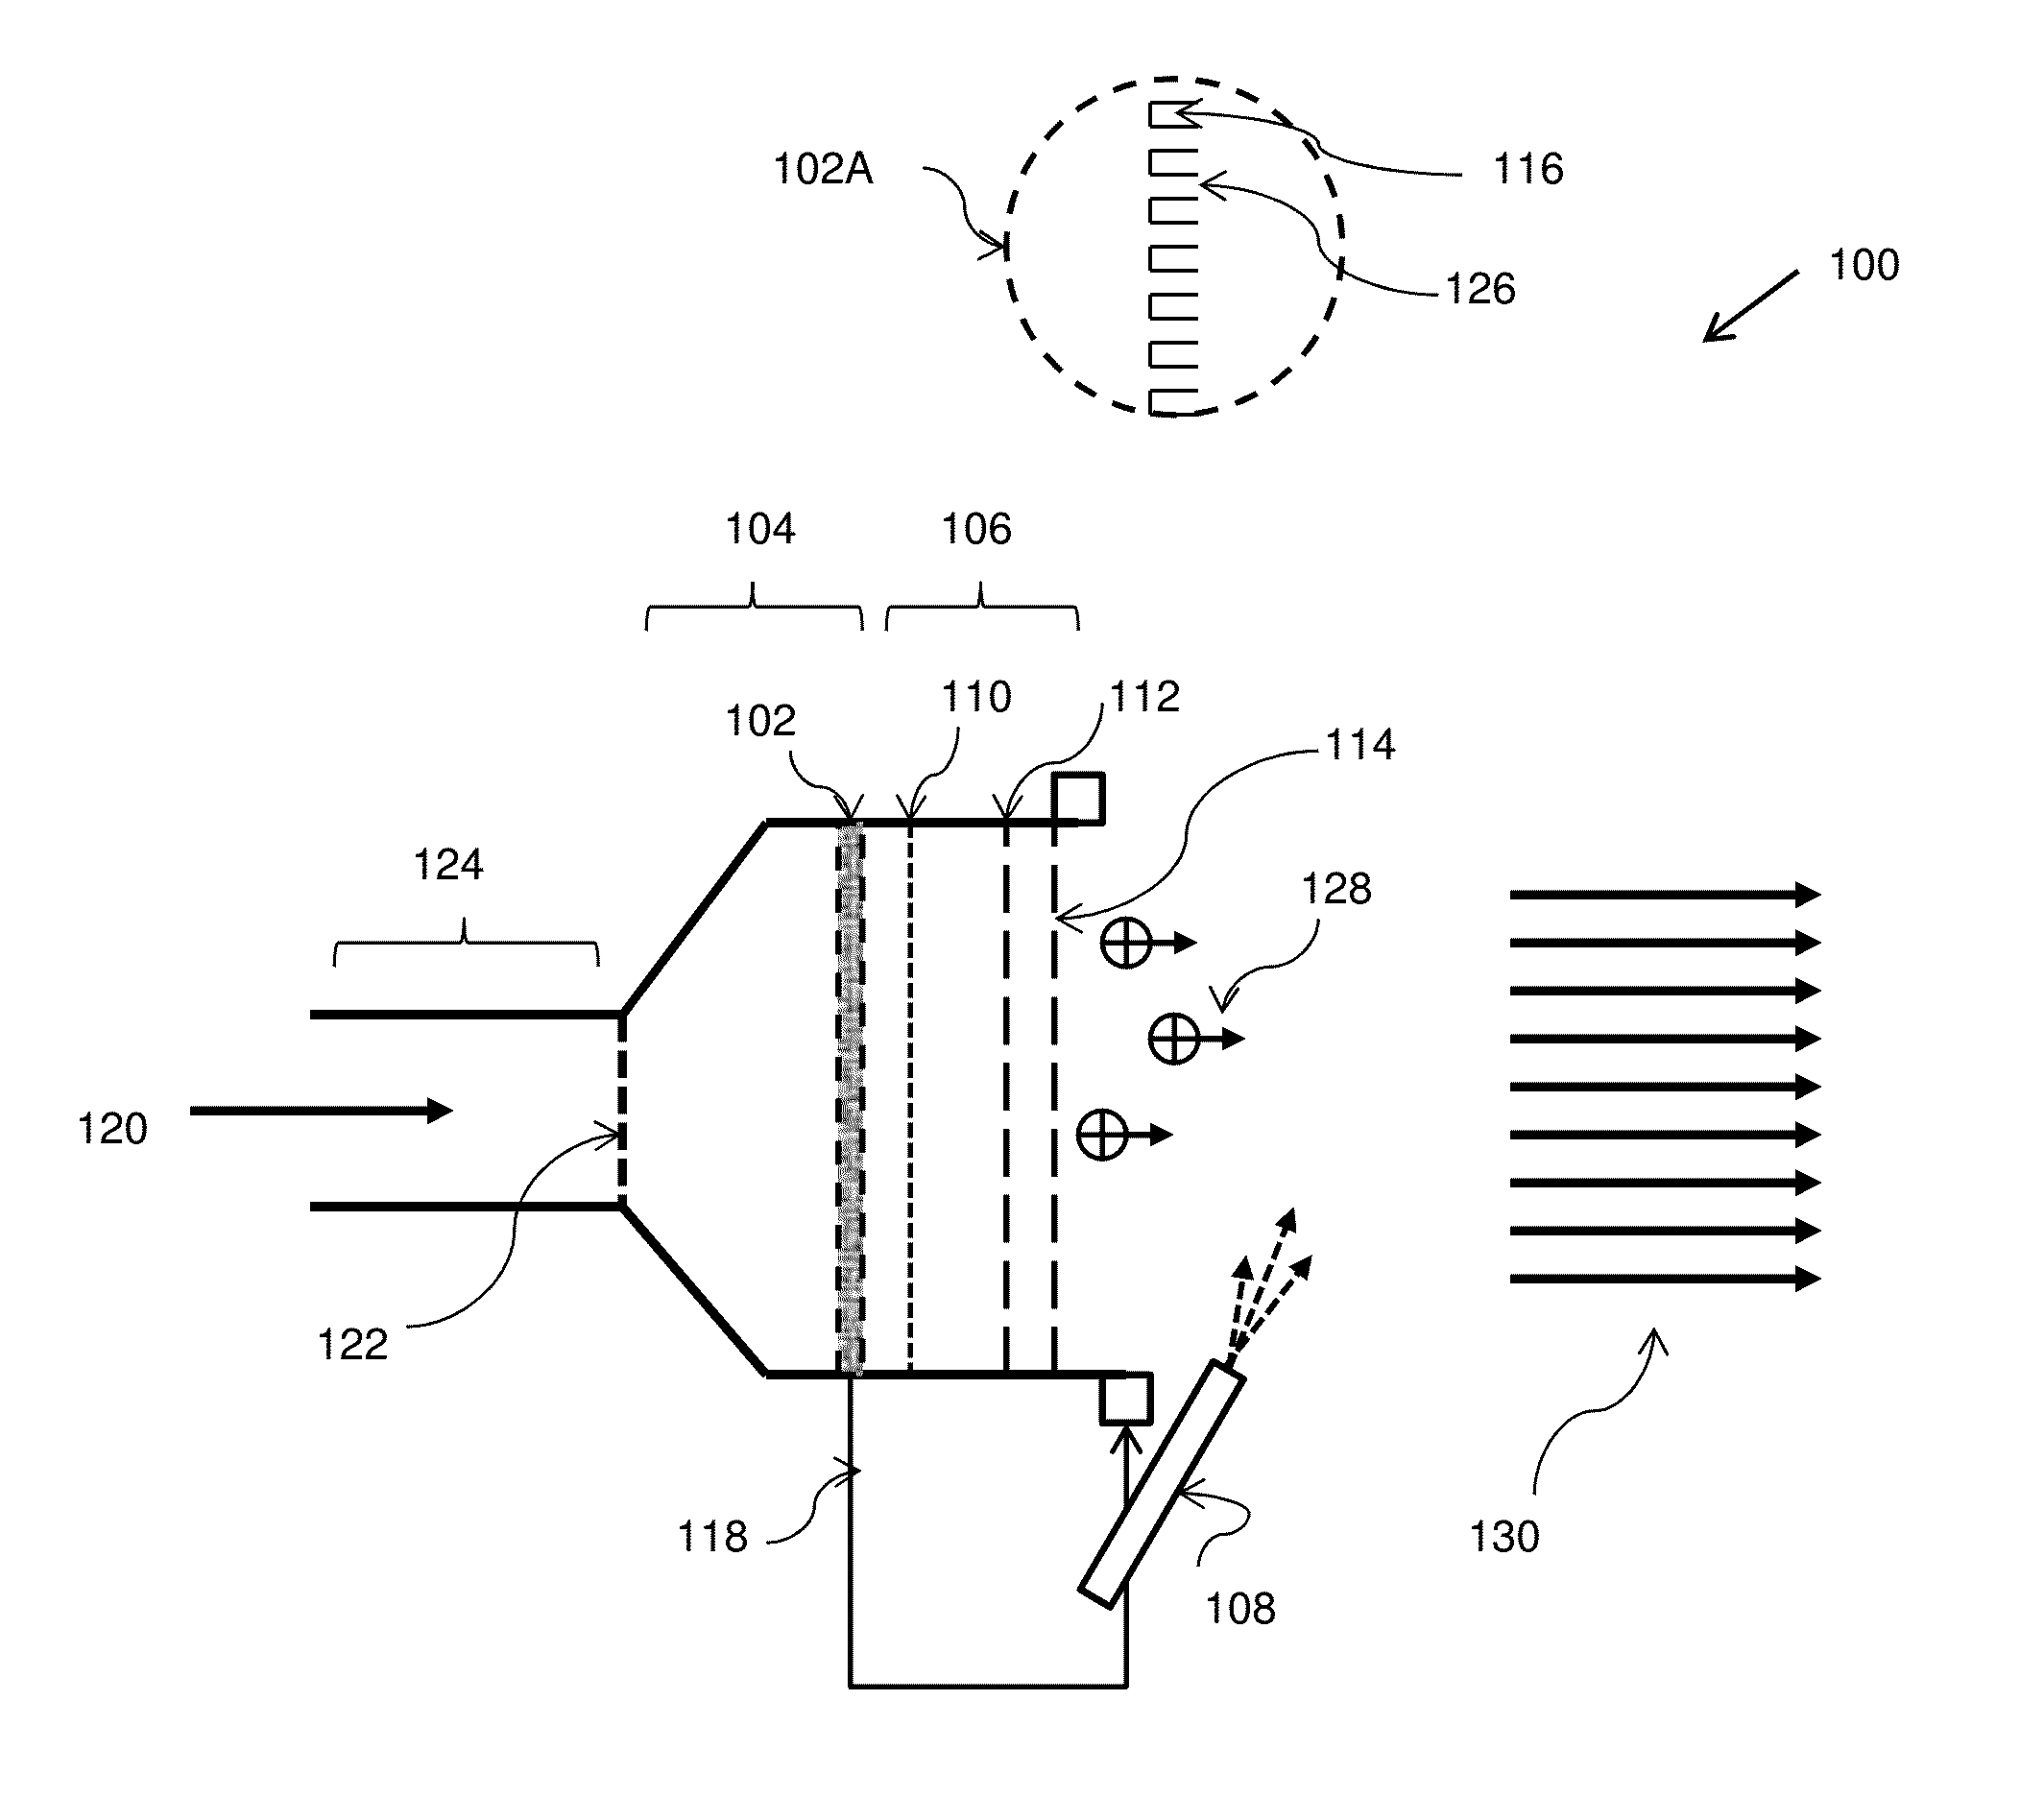 Field-ionization based electrical space ion thruster using a permeable substrate